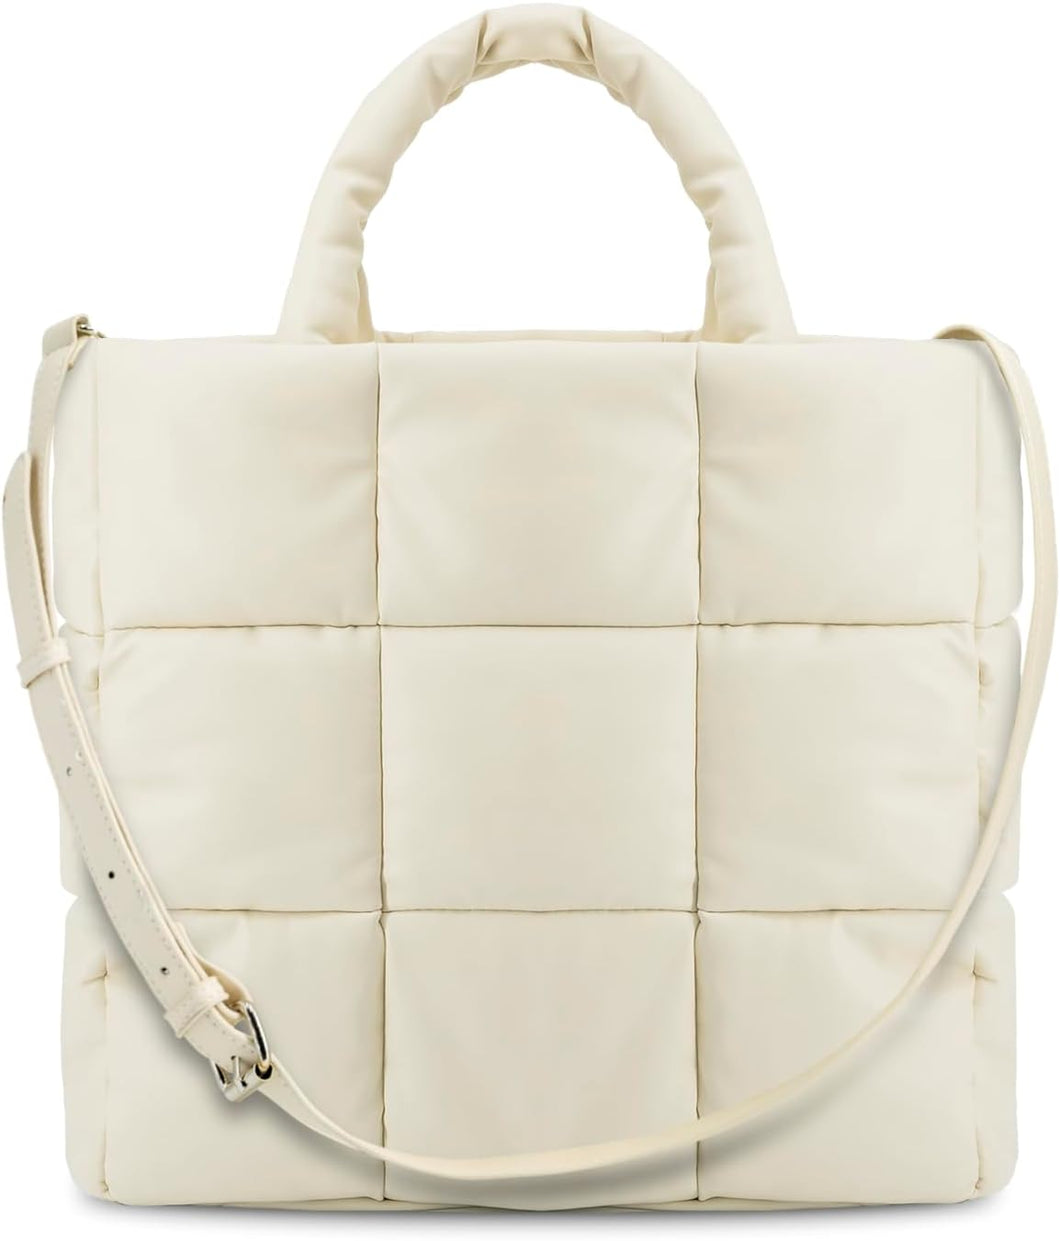 Pillow Soft Off White Square Quilted Top Handle Tote Bag